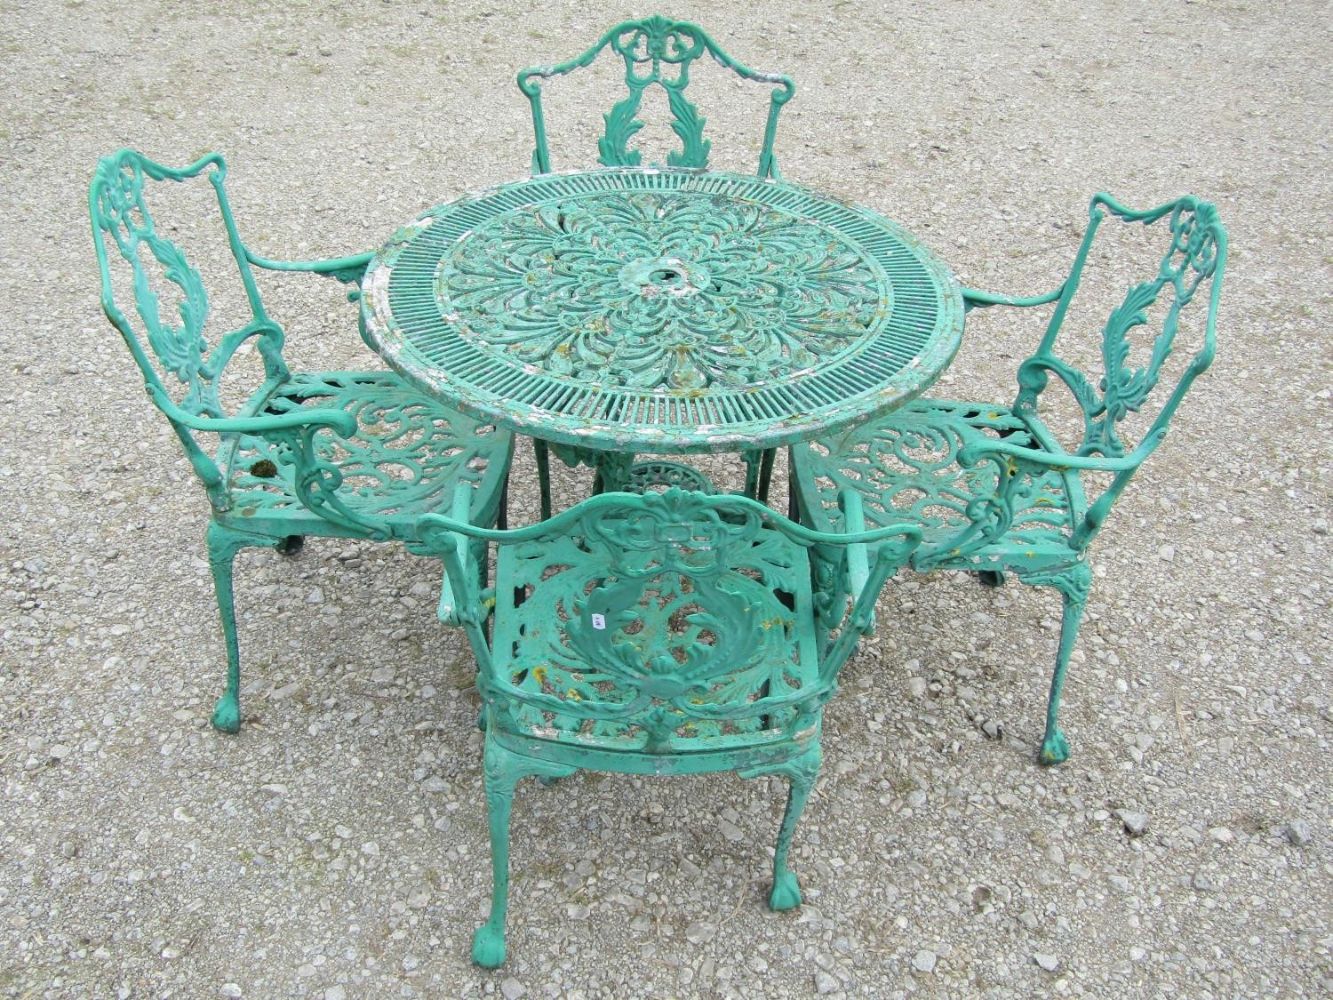 Annual Specialist Garden Effects, Architectural Salvage & Decorative Arts Sale, Viewing on Friday 26th 10am - 6pm, Sale on Saturday 27th